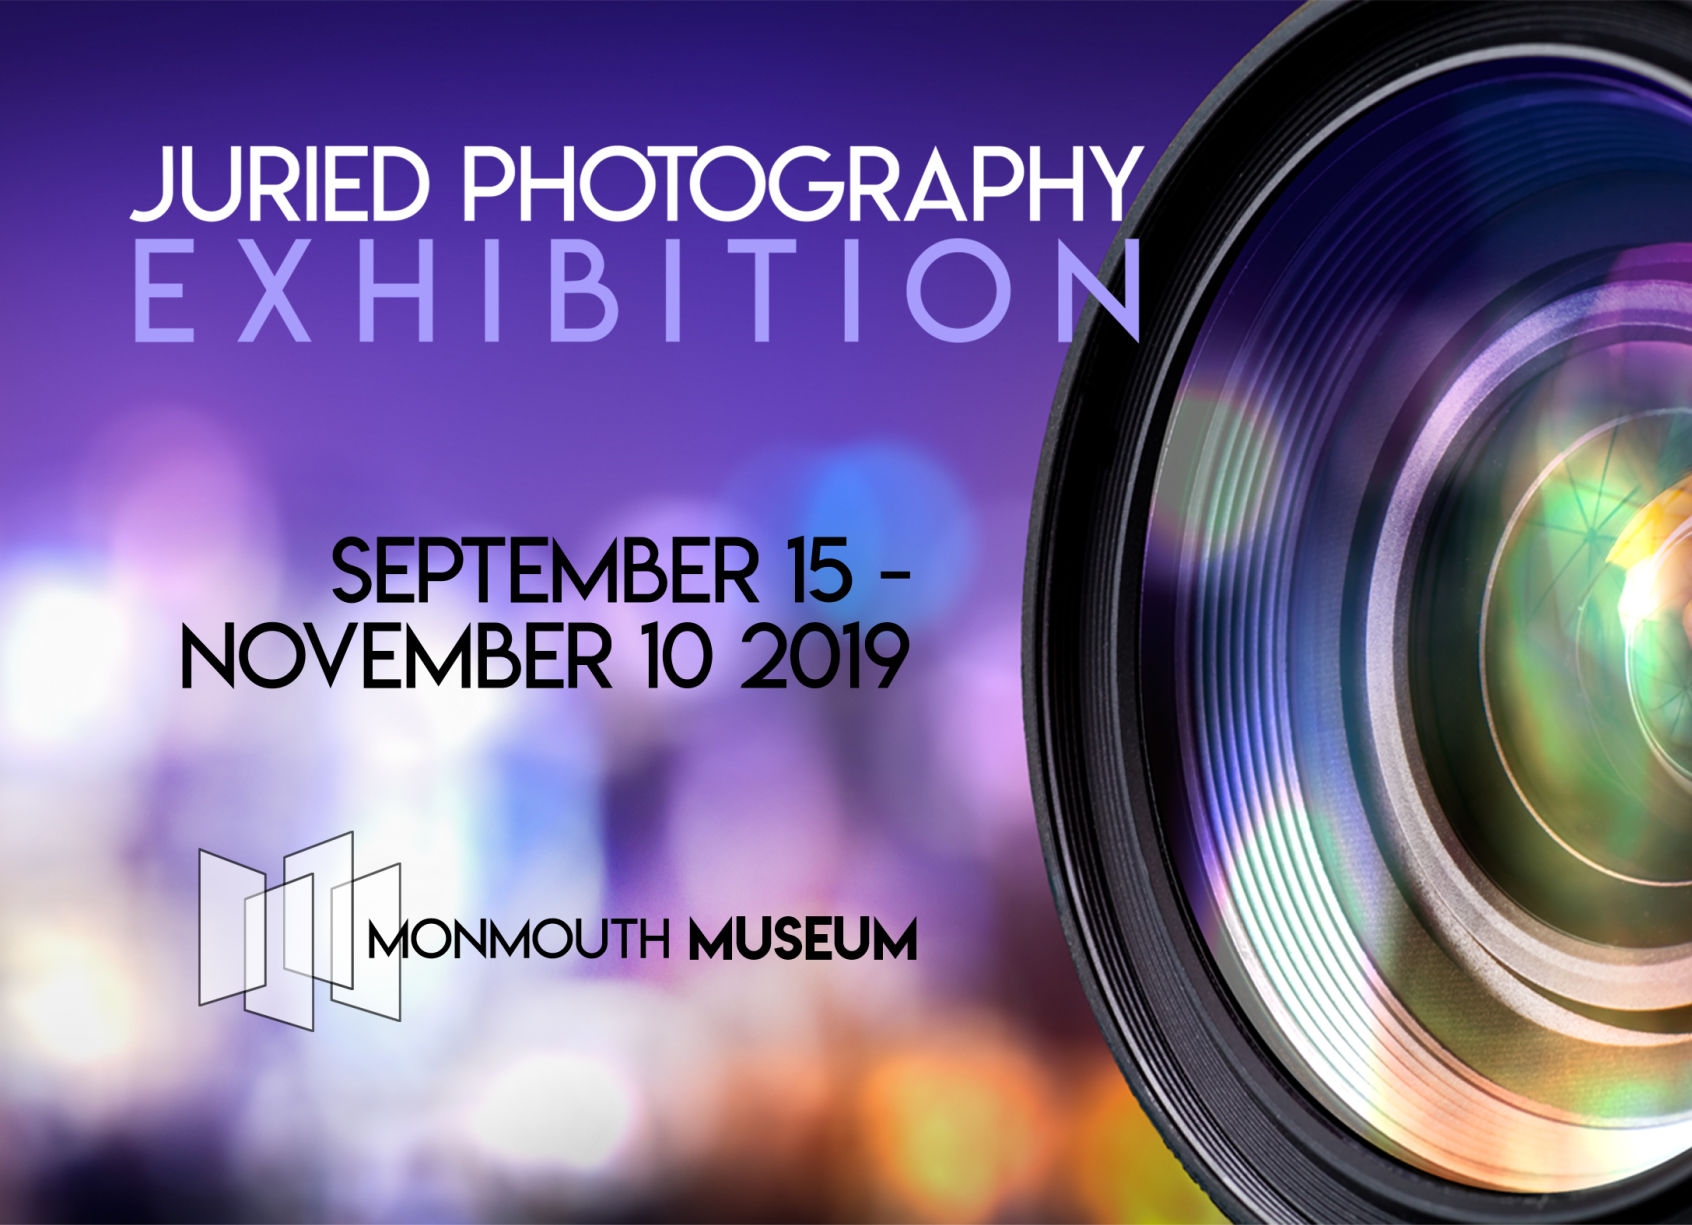 Juried Photography Exhibition at the Monmouth Museum